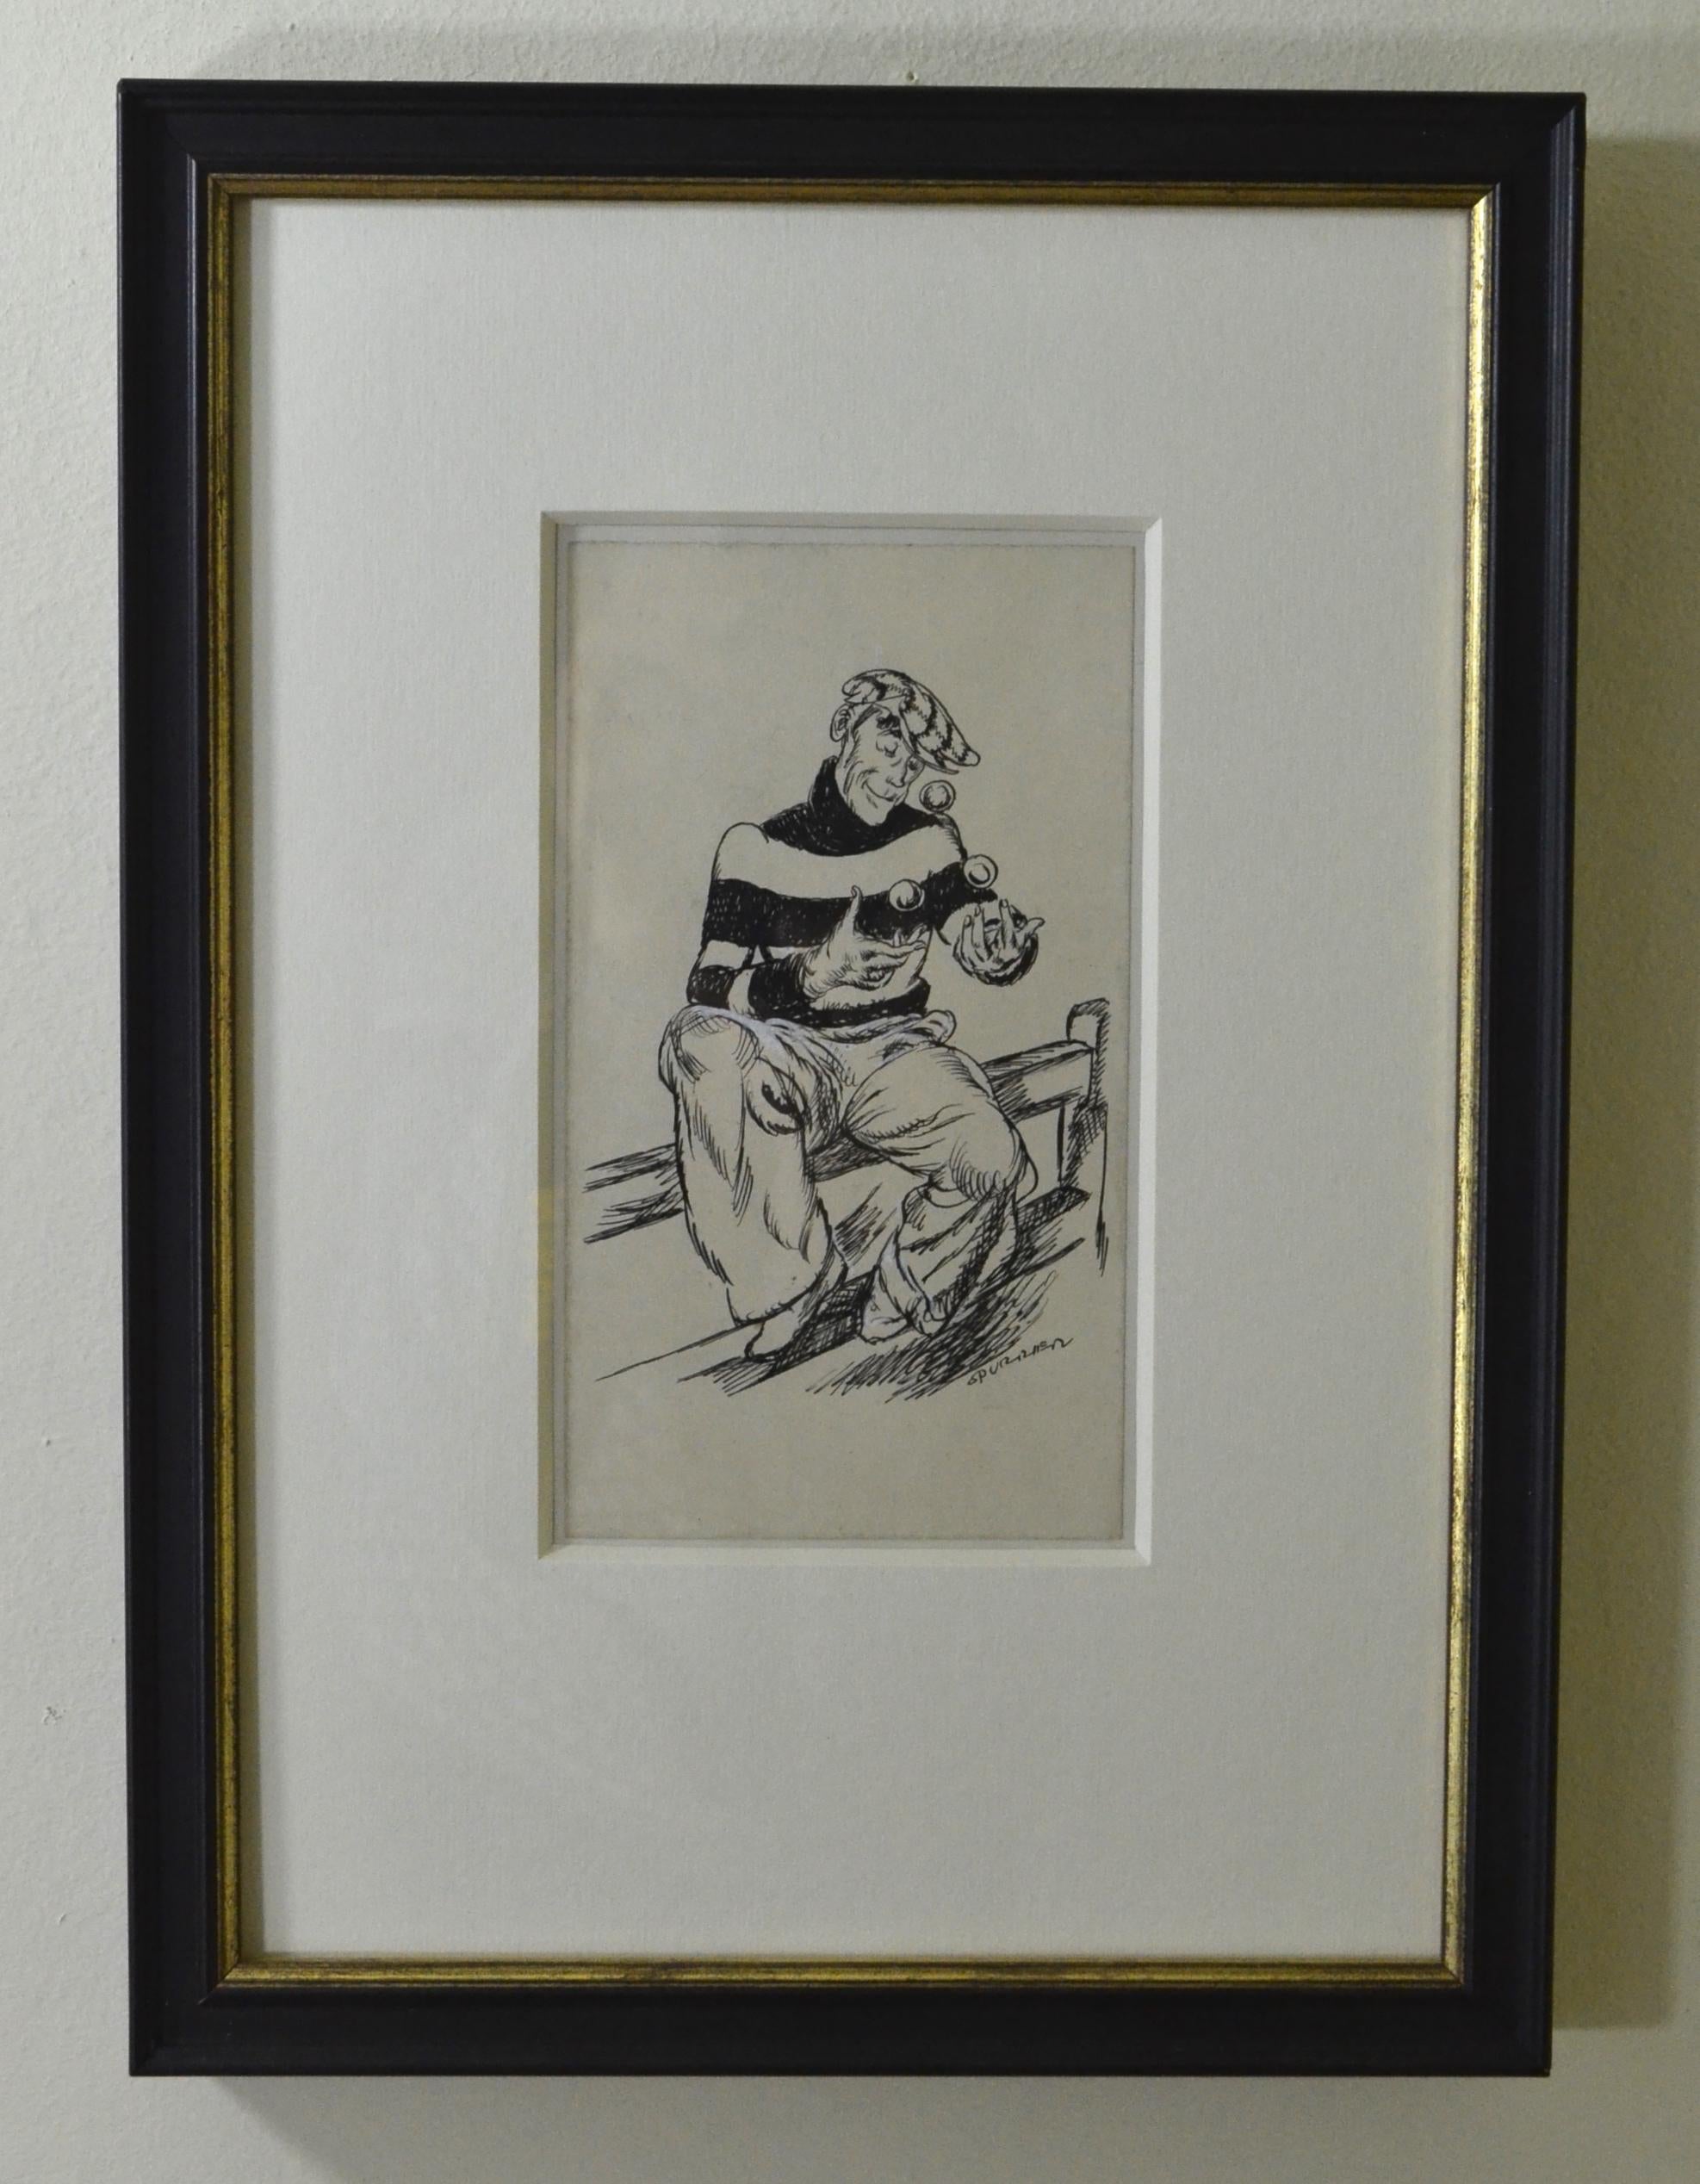 STEVEN SPURRIER
(1878-1961)

Charlie Chaffinch

Signed; inscribed beneath the mount: Charlie Chaffinch. Sampsons Circus No.4 Faber & Faber
Pen and ink, framed

17 by 9.5 cm., 6 ¾ by 3 ¾ in.
(frame size 34 by 24.5 cm., 13 ½ by 9 ¾ in.)

After an